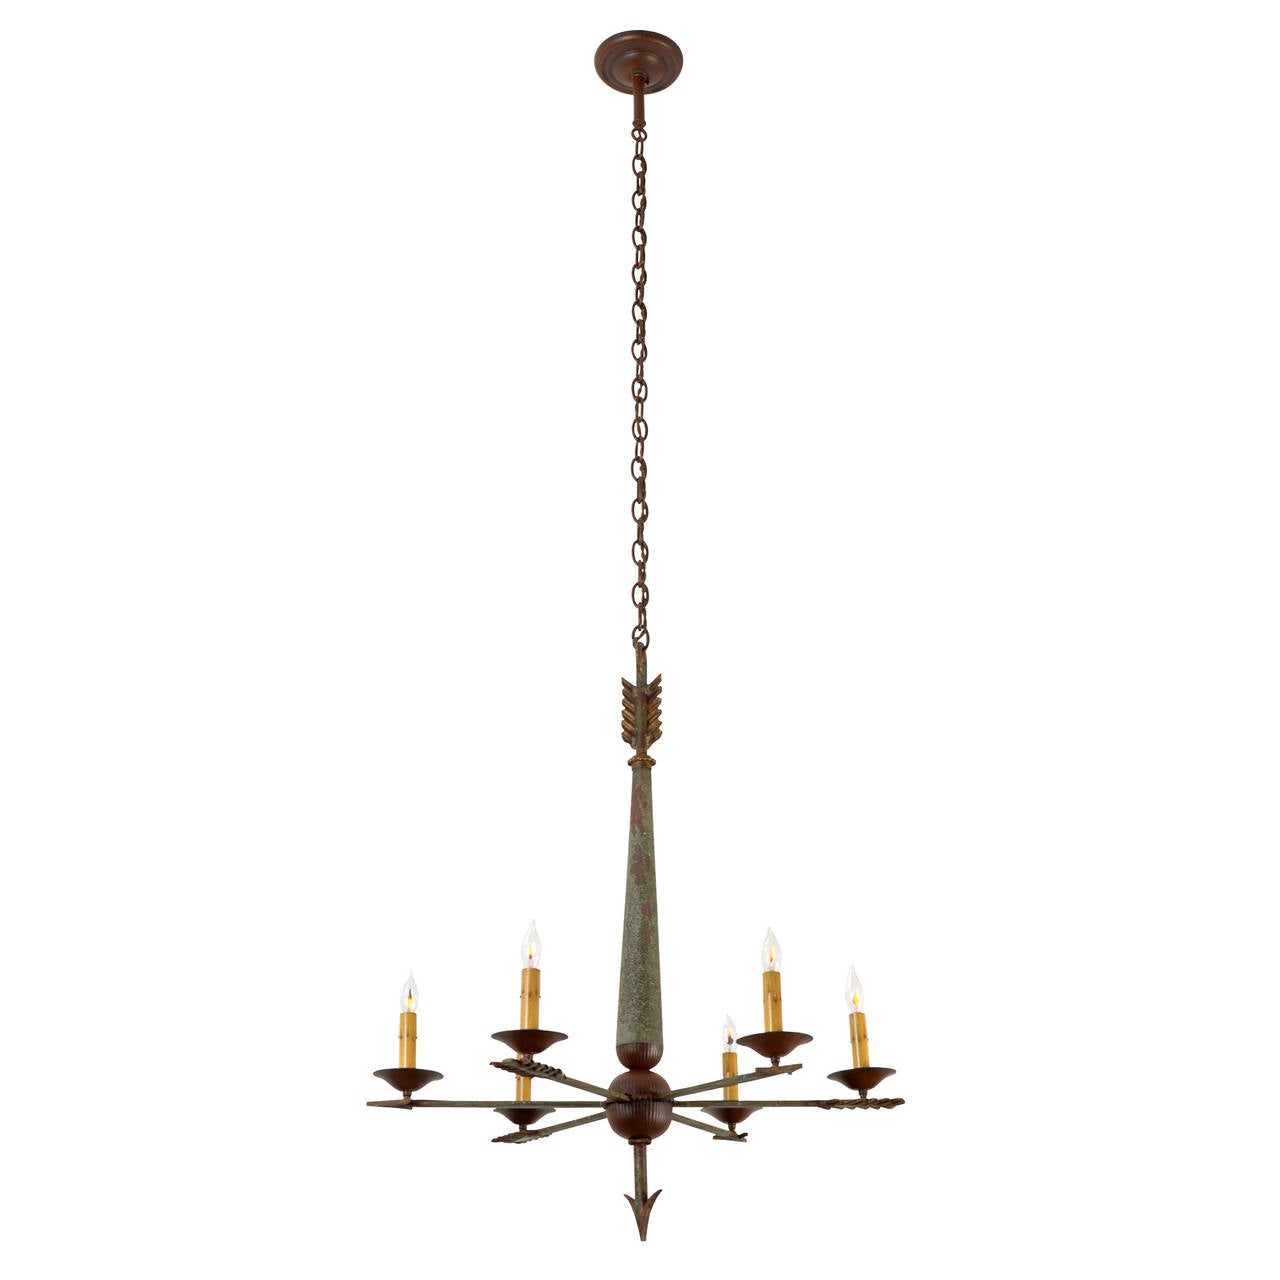 This remarkable 6-light chandelier is as mysterious as it is dramatic. While simple, thematic styling usually denotes a later date of manufacture, the hand-forged iron arrows and reeded cluster body suggest that this piece hails from earlier in the